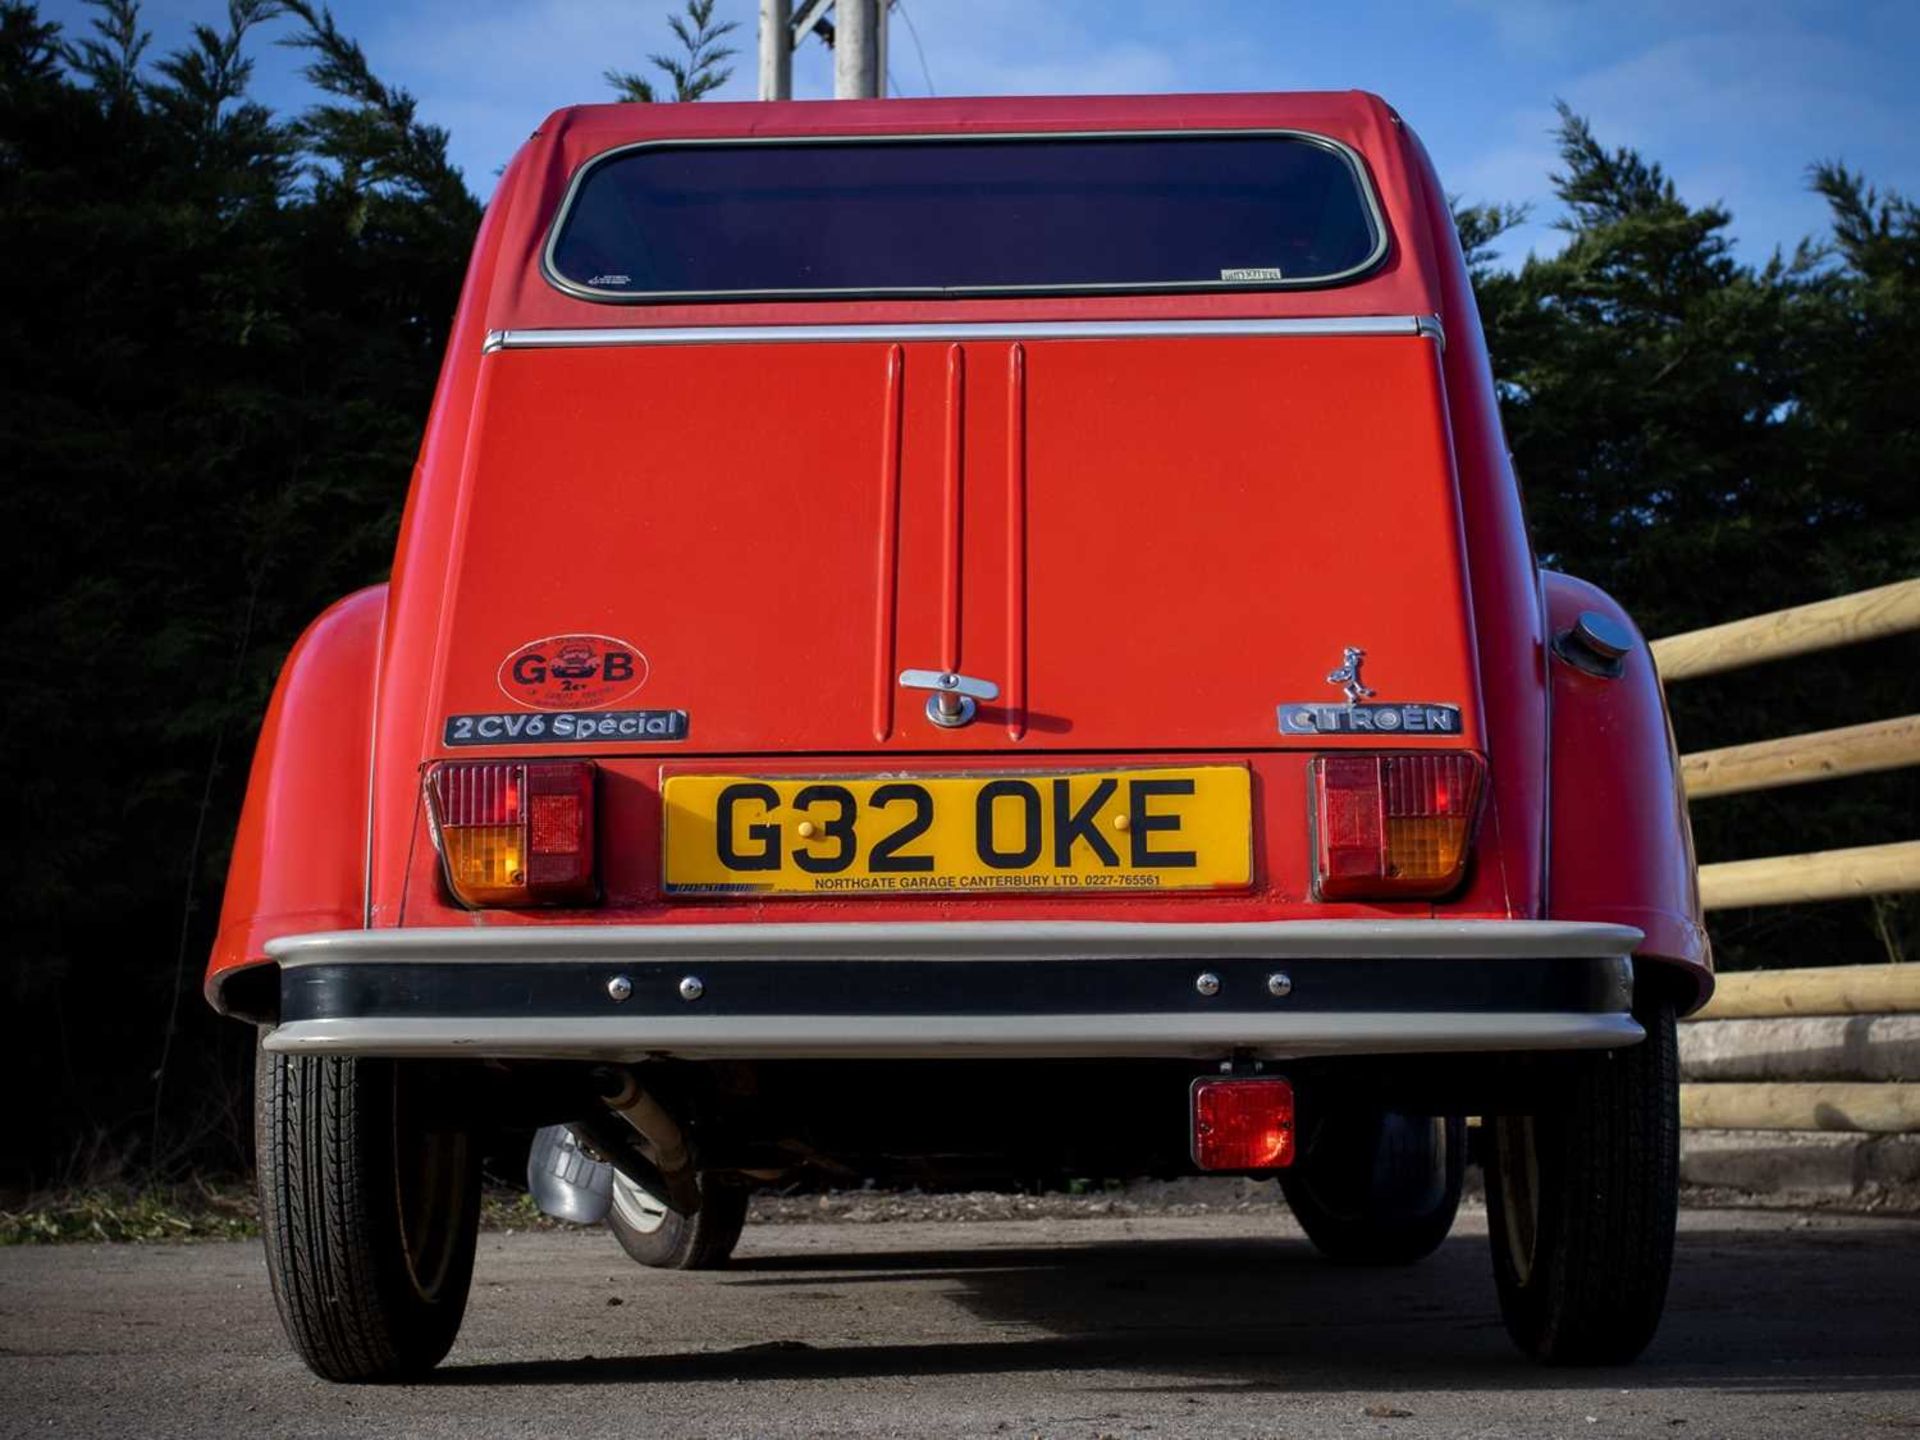 1989 Citroën 2CV6 Spécial Believed to have covered a credible 15,000 miles - Image 20 of 113